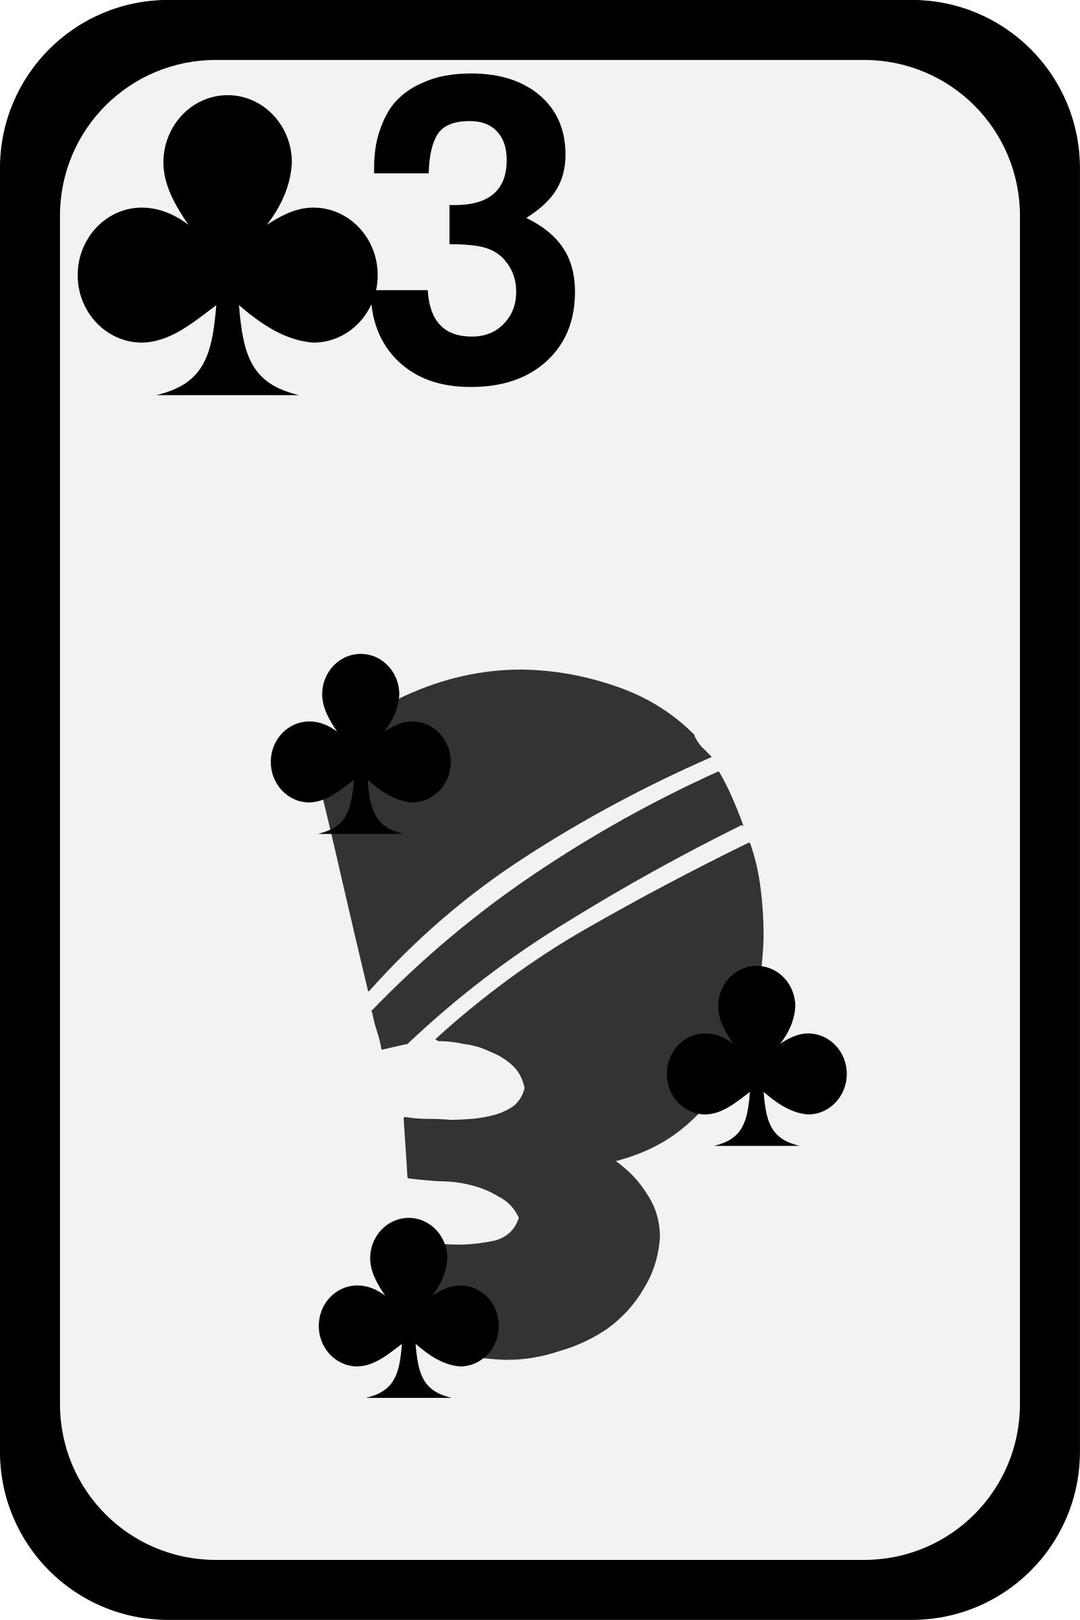 Three of Clubs png transparent